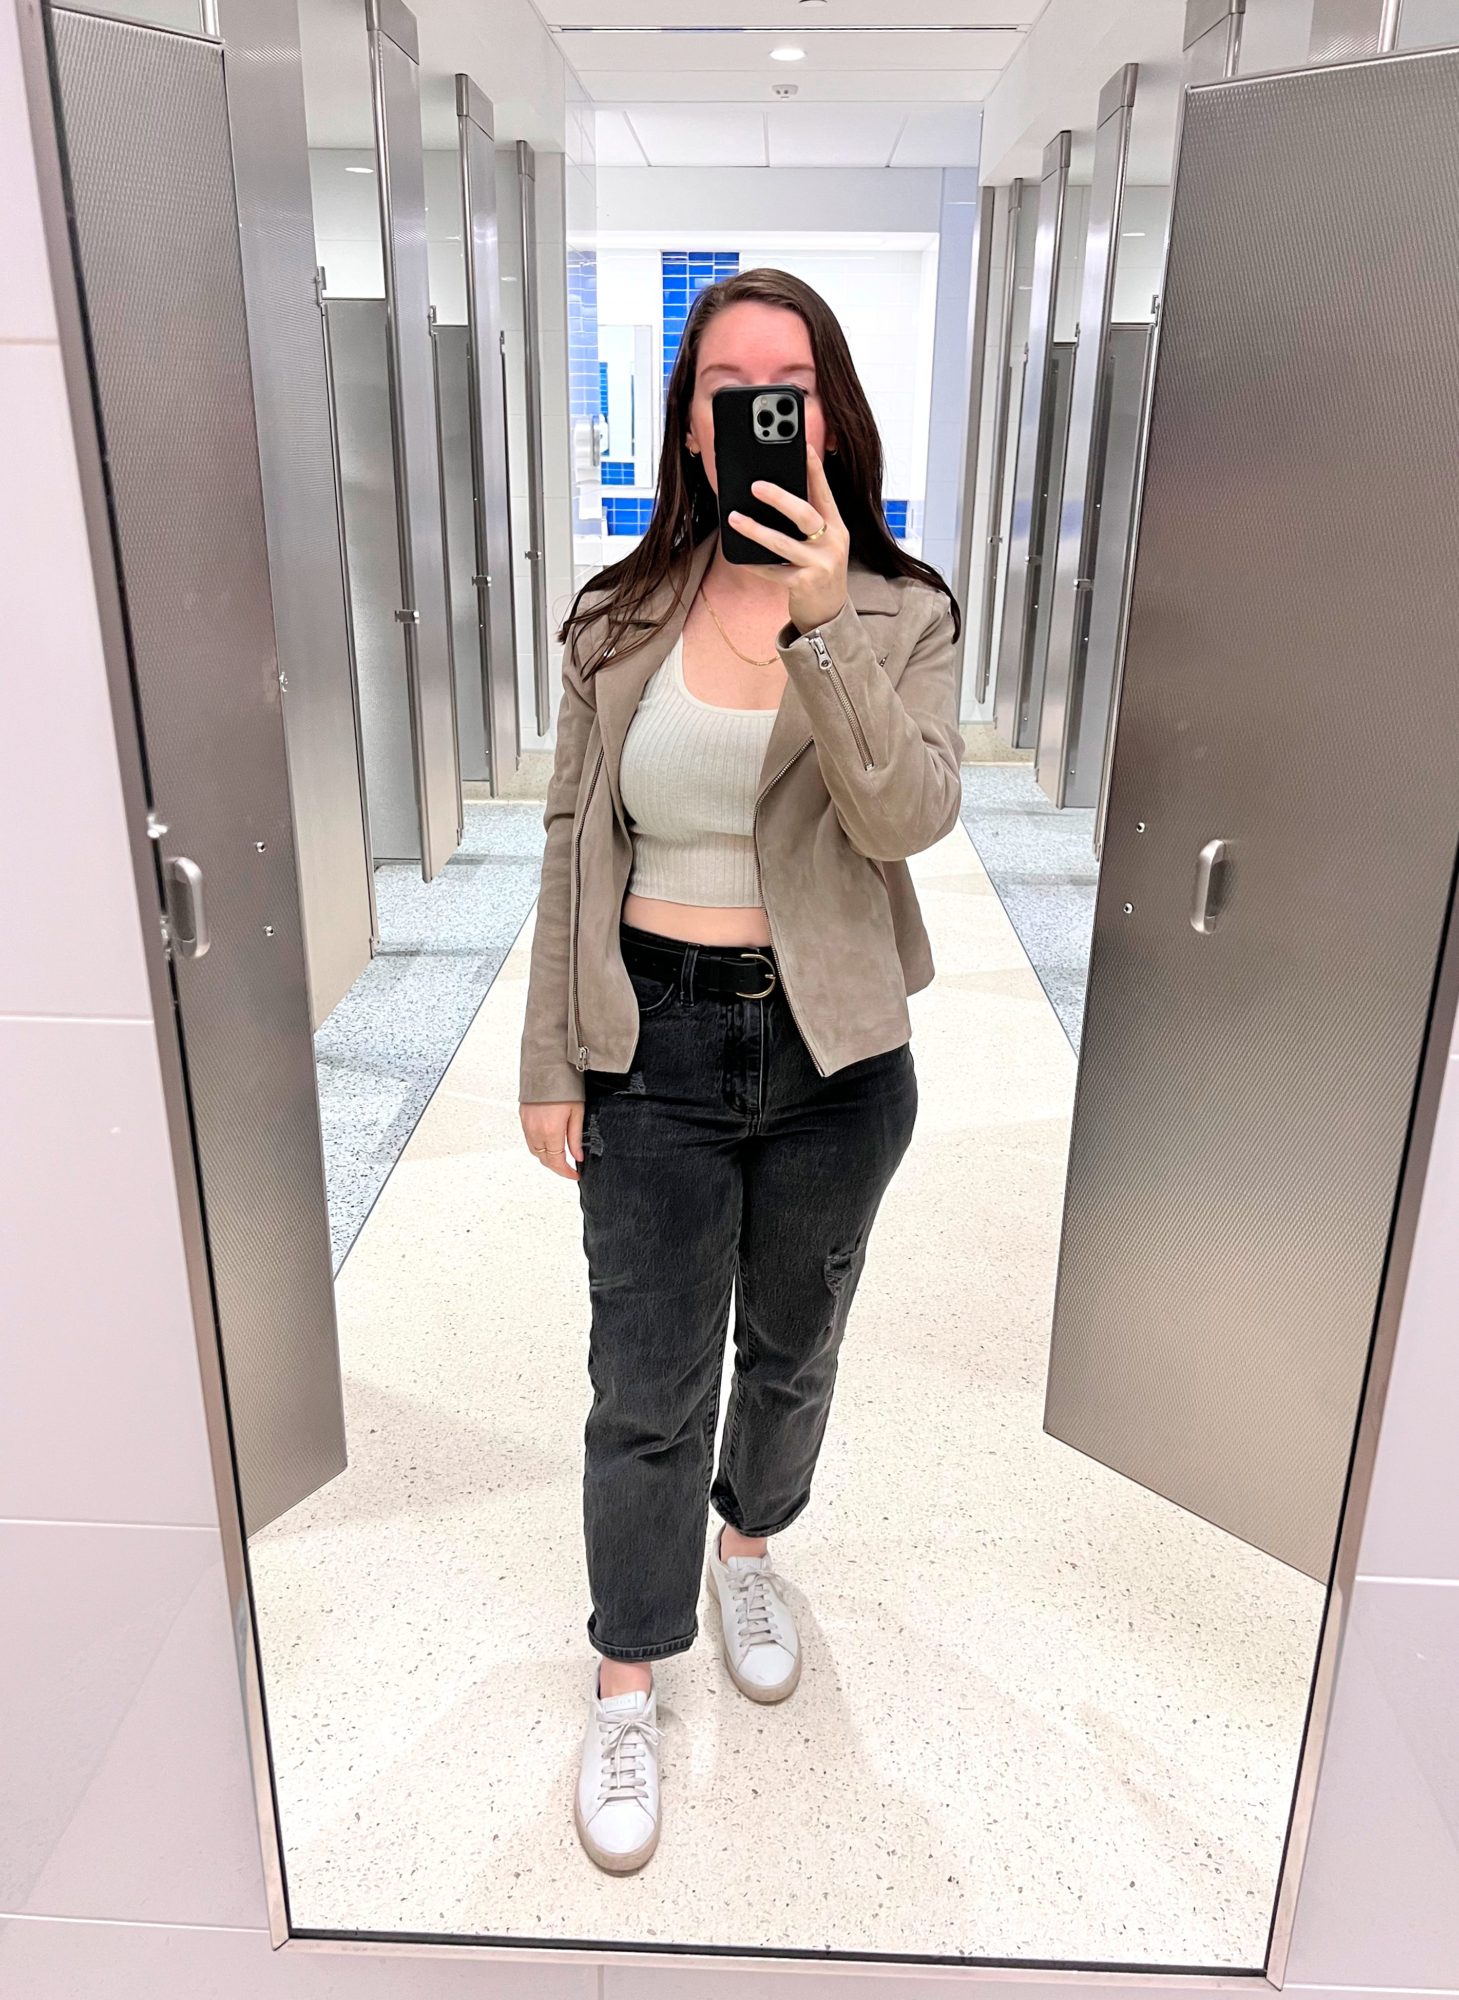 Alyssa wears a crop top and jeans at the airport with a suede jacket